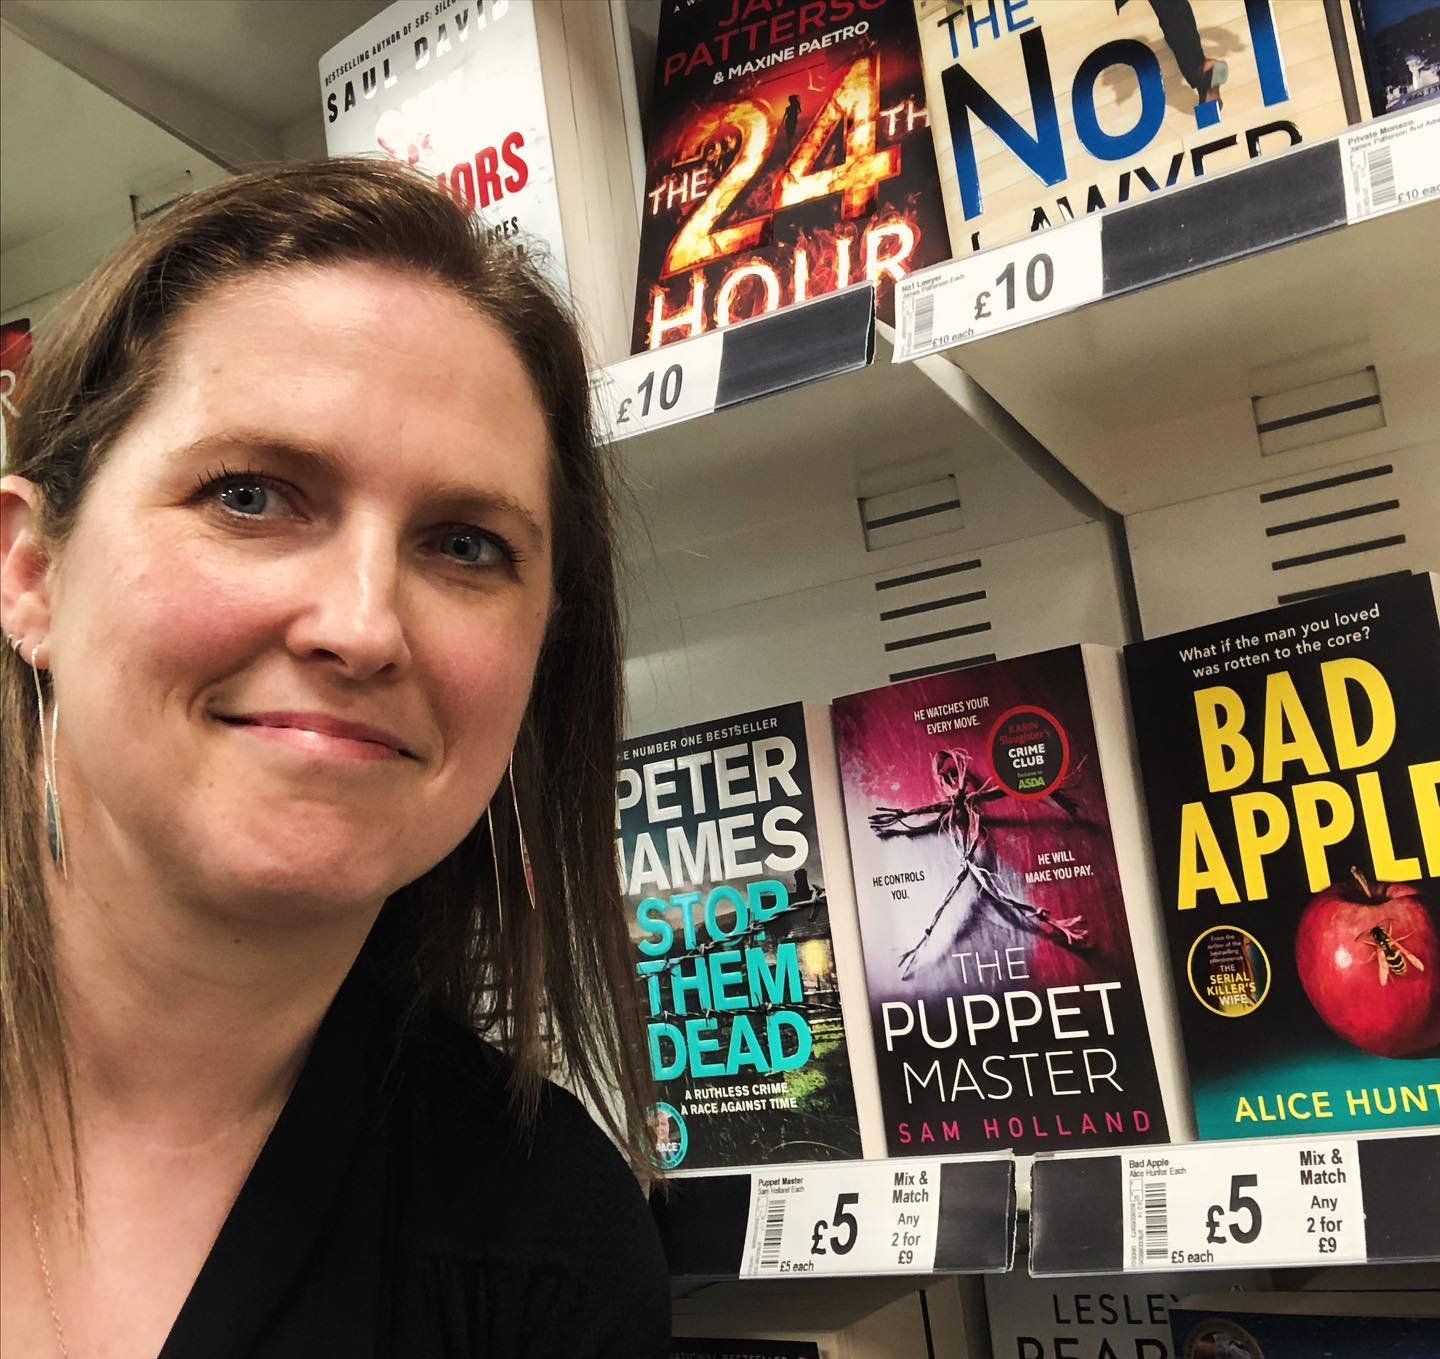 It&rsquo;s my book! In a supermarket! (It&rsquo;s hard to take selfies with your book in Asda and not attract strange looks, but I tried my best.)
Anyway, The Puppet Master is available in Asda. With bonus content, to boot.